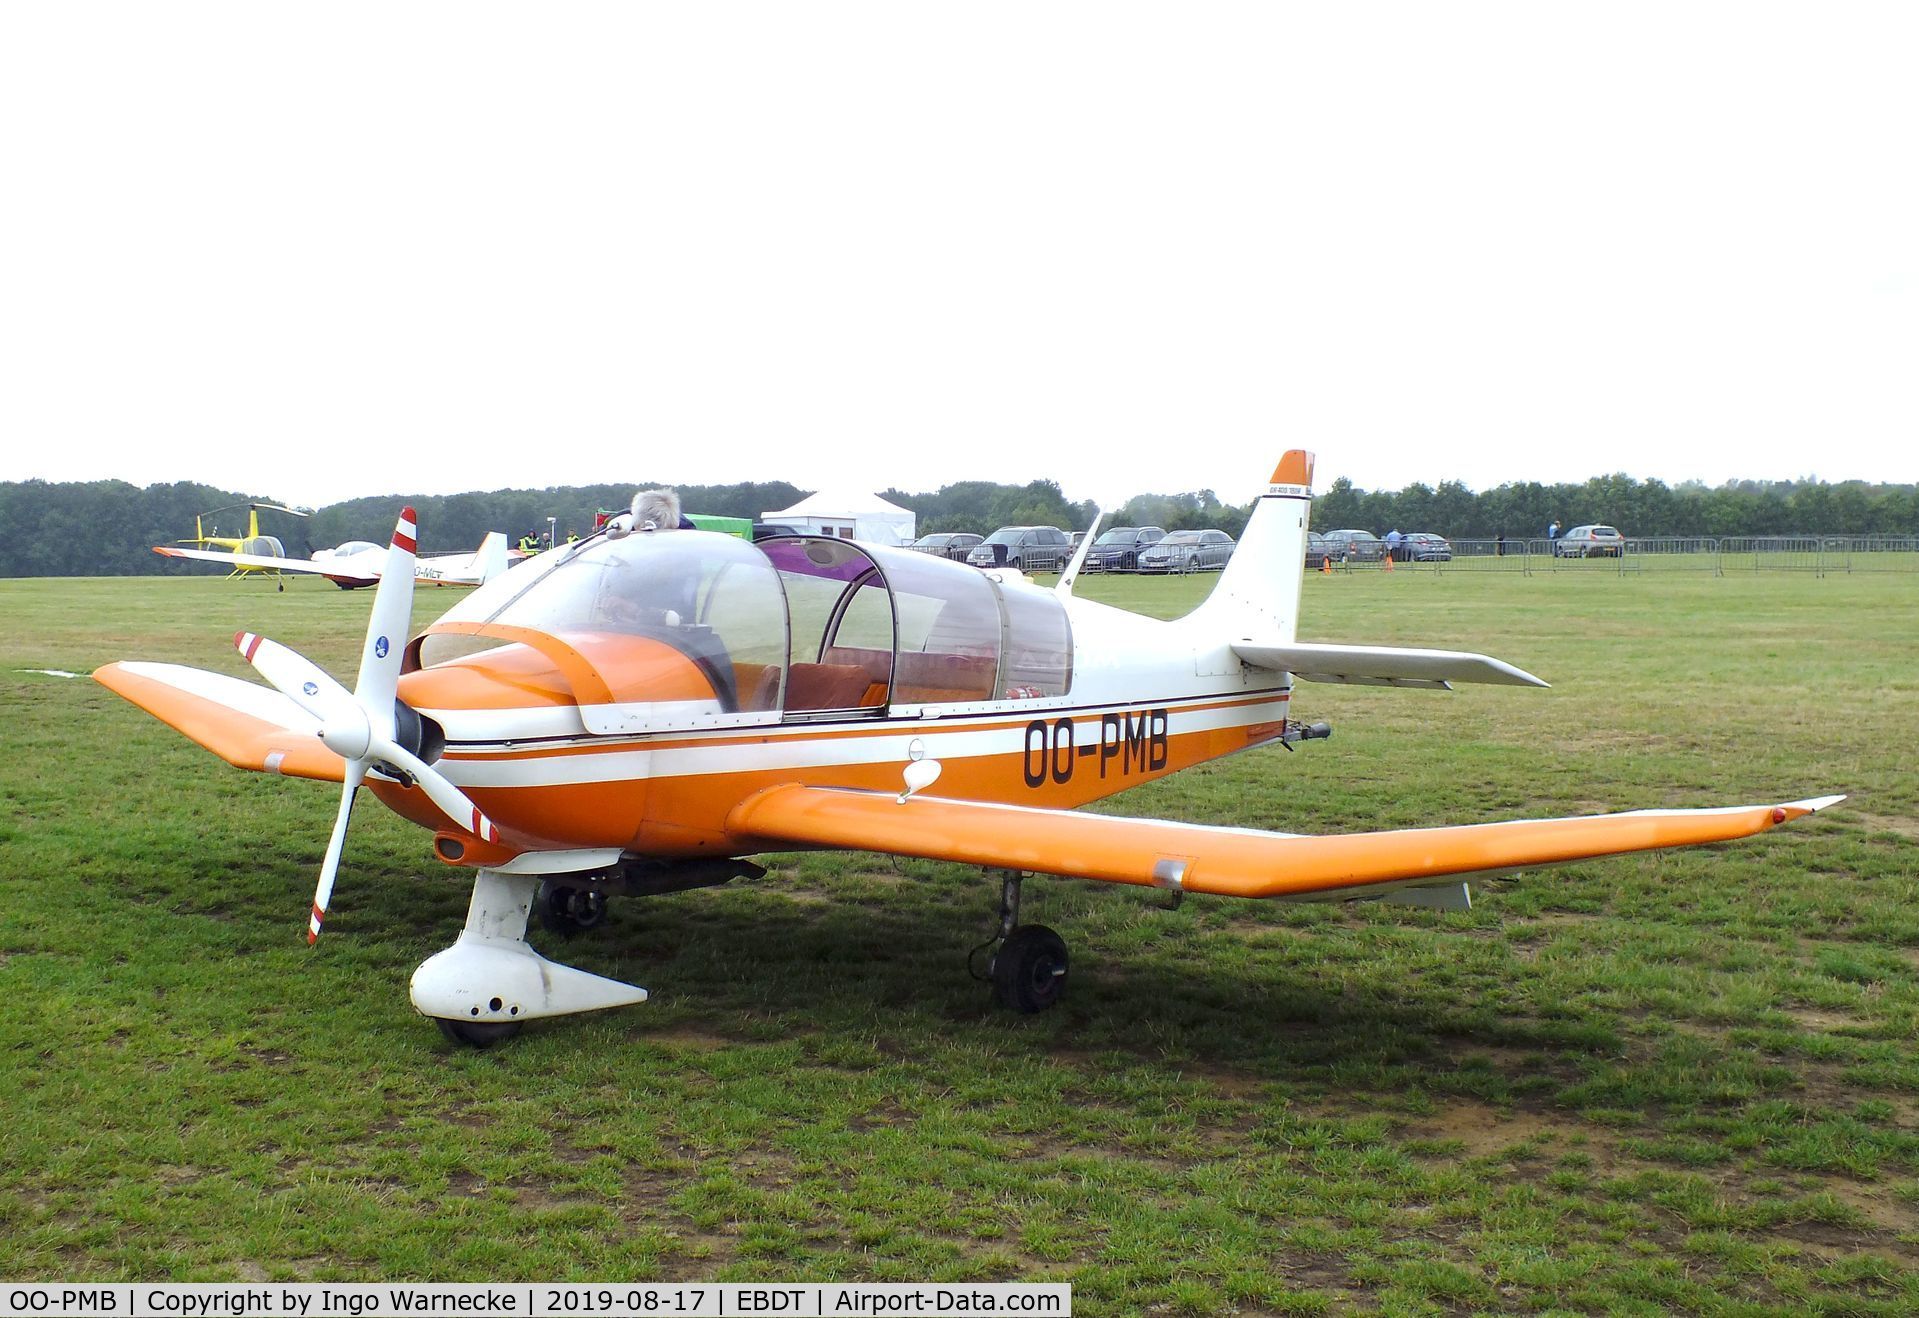 OO-PMB, 1978 Robin DR-400-180R Remorqueur Regent C/N 1366, Robin DR.400-180R Remorqueur at the 2019 Fly-in at Diest/Schaffen airfield